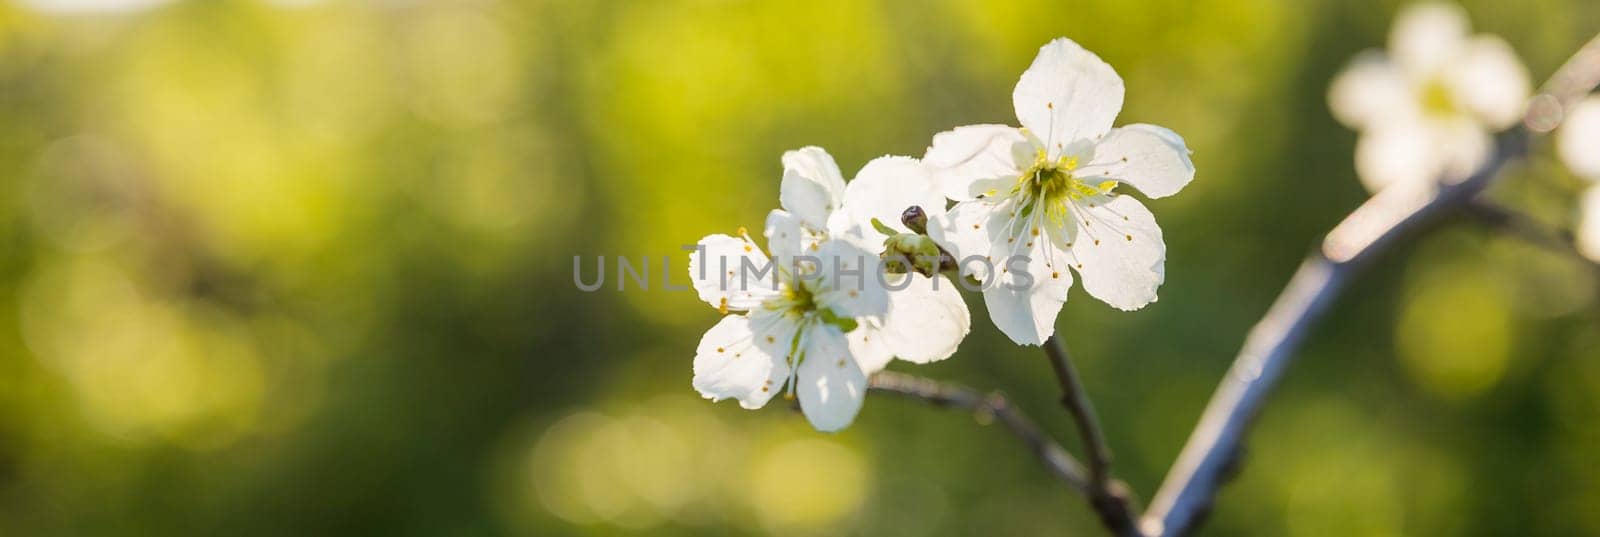 Blooming apple tree branches in spring garden. Close up for white apple flower buds on a branch. Springtime concept, floral background.Spring or summer festive white flowers fruit tree branches by YuliaYaspe1979